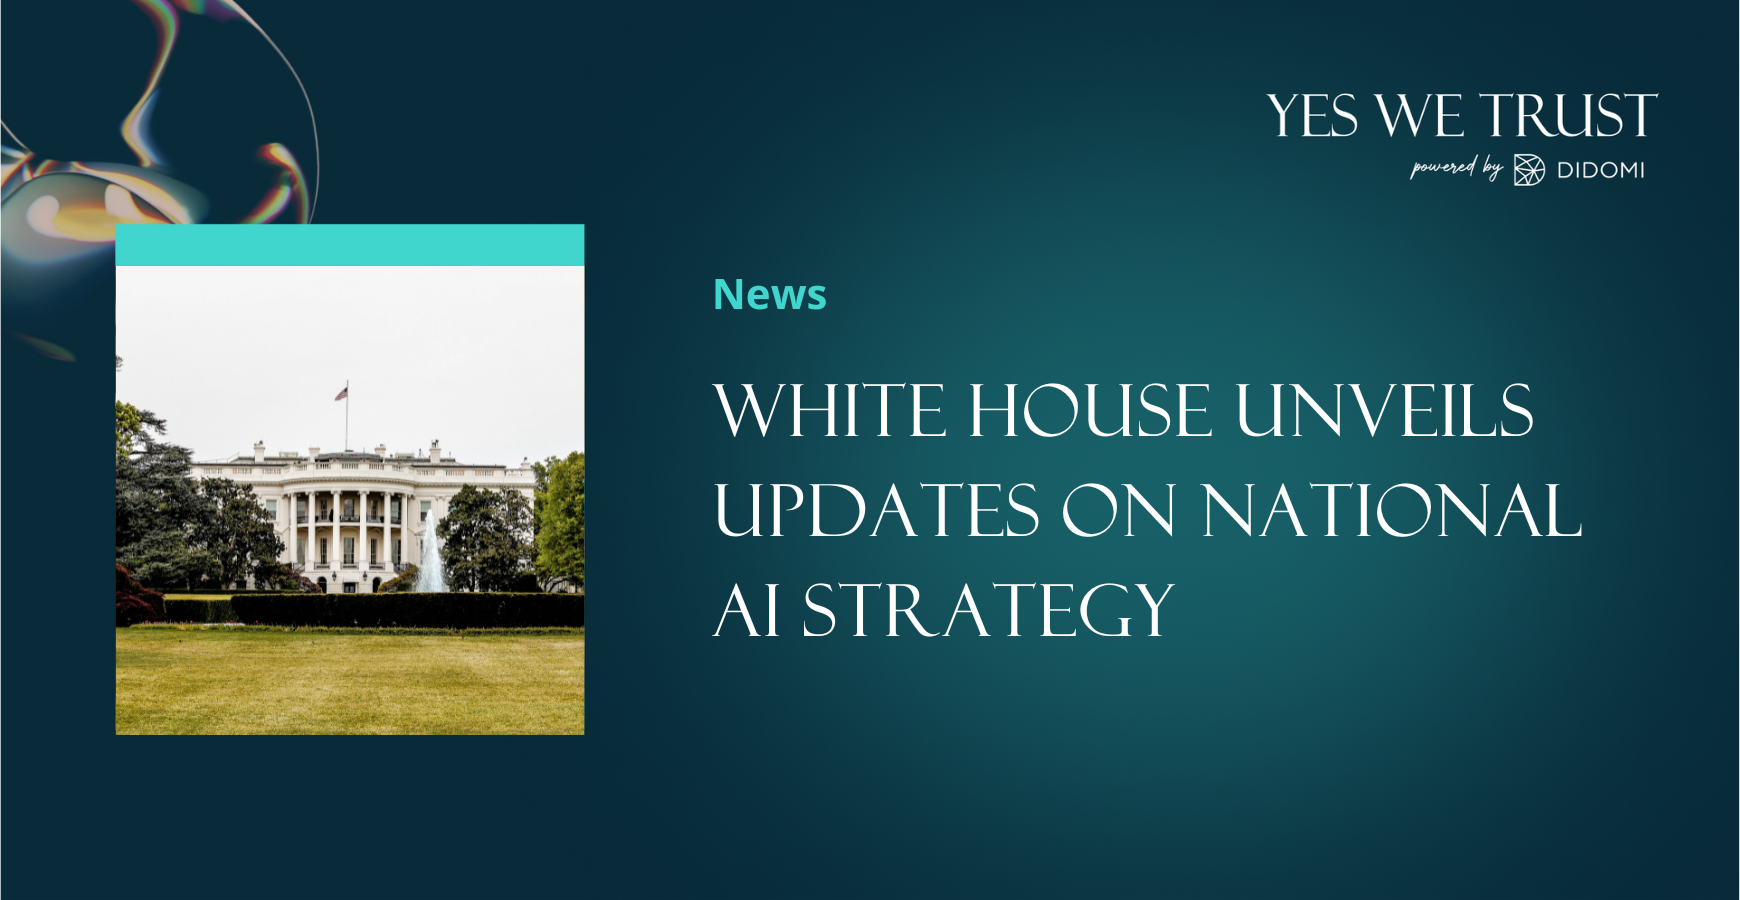 The White House unveils updates on national AI strategy